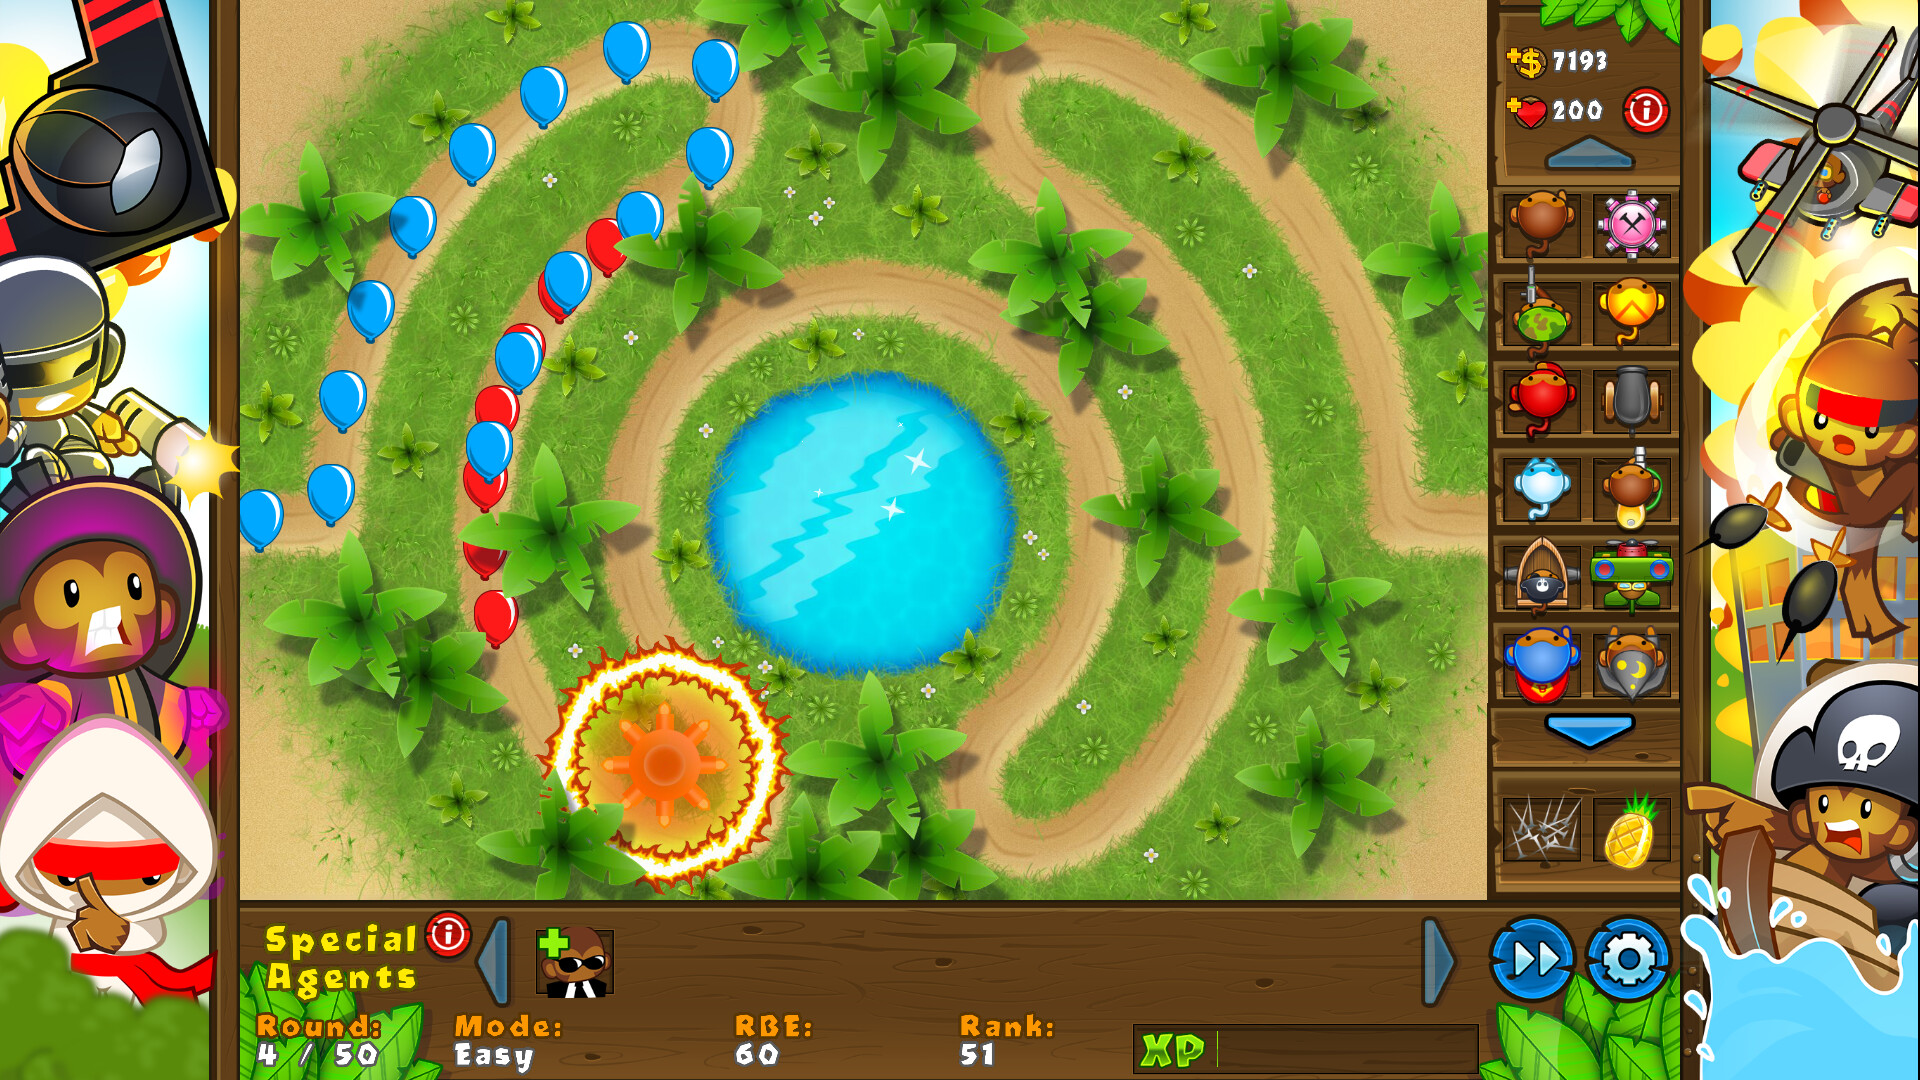 Bloons TD 5 - Classic Tack Tower Skin on Steam